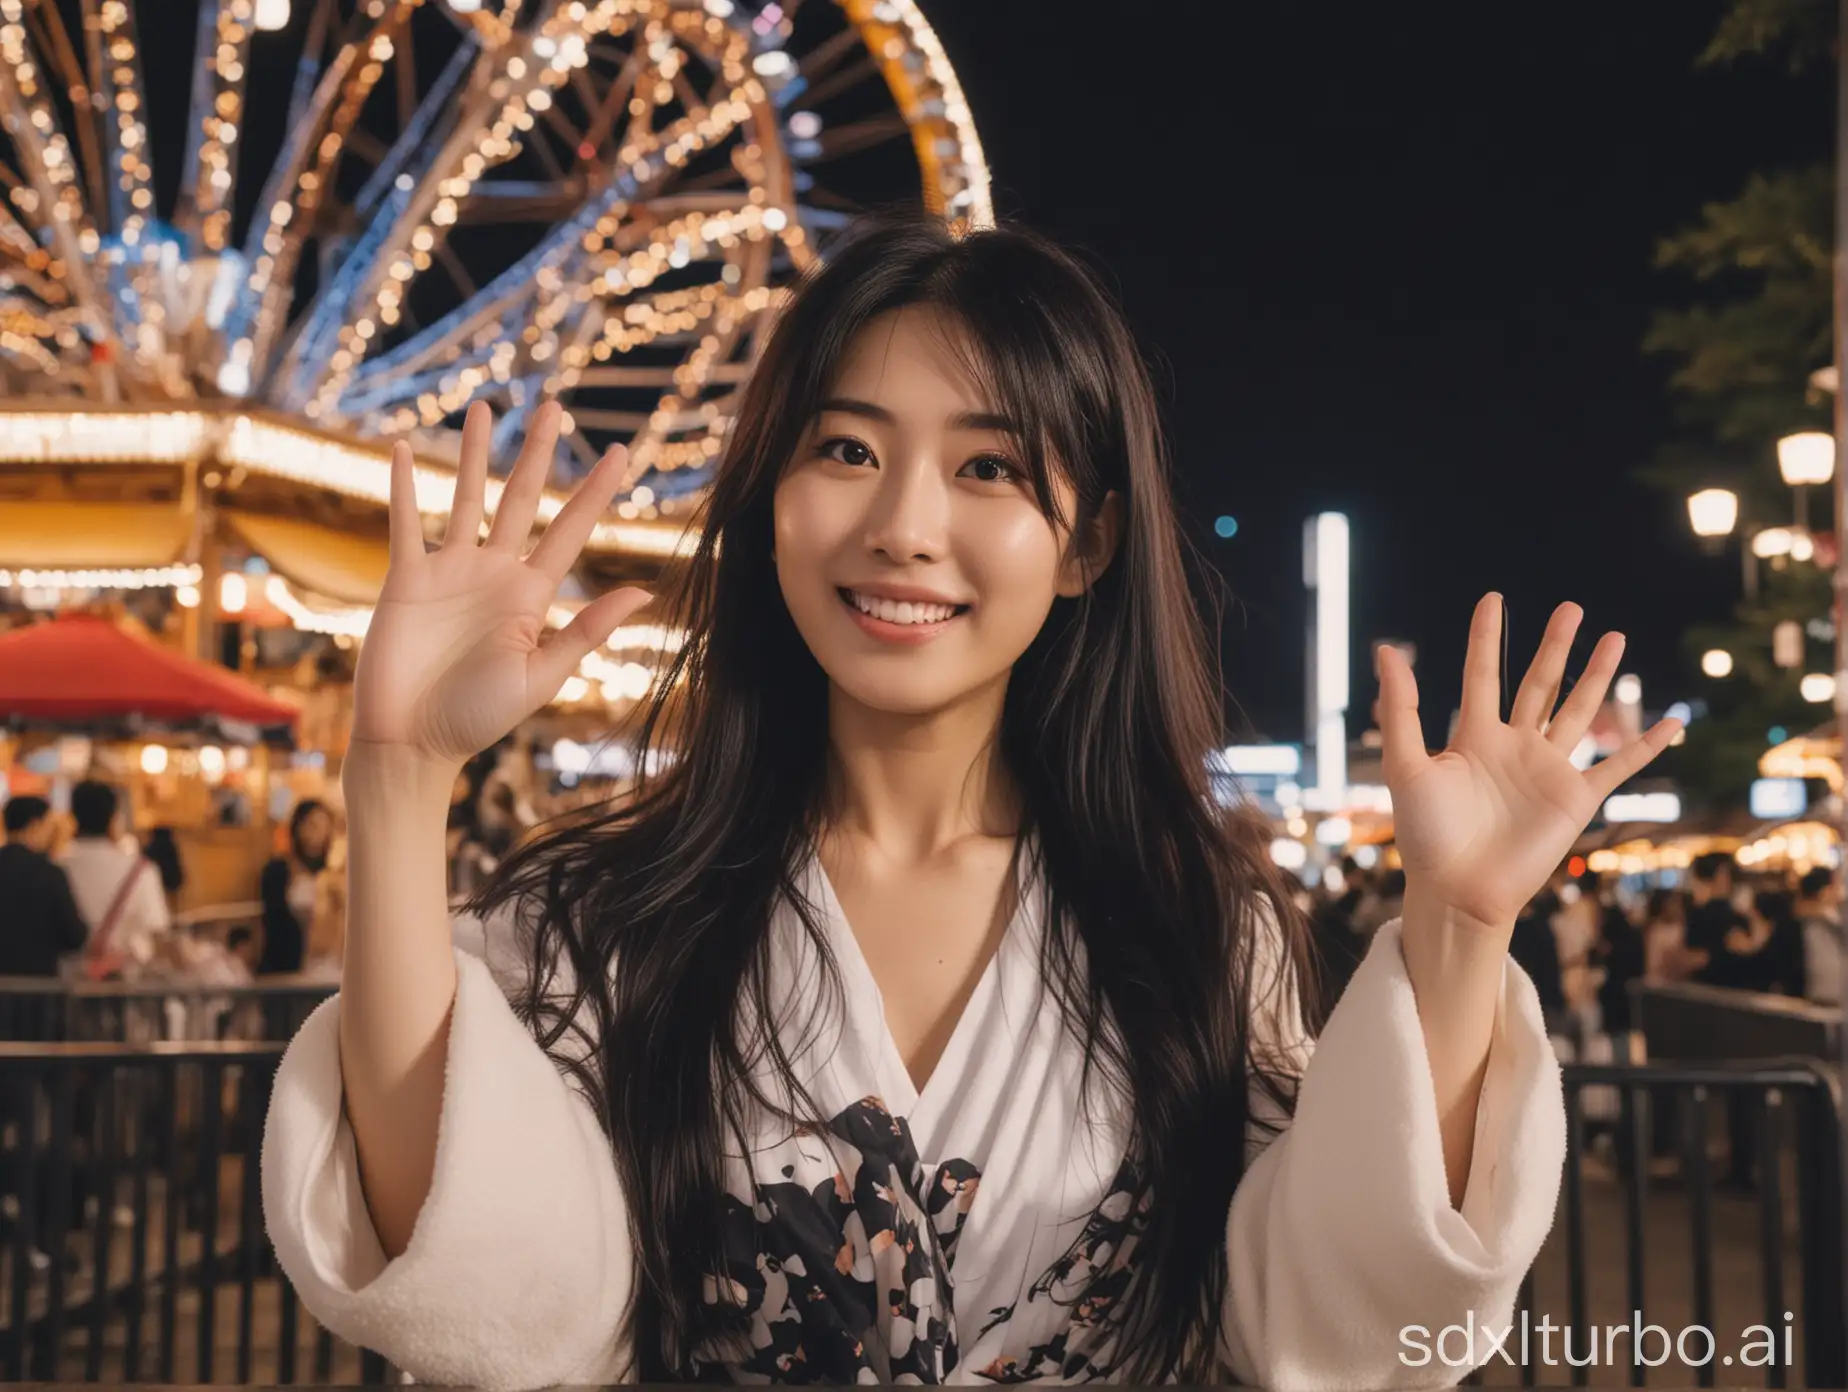 beautiful intellectual typical Japanese 33-year-old girl is having a fun in an amusement park at night, waving her hands, Instagram model, long black hair, warm, height 6.5 feets, female, masterpiece, 4k, (((correct fingers or hands)))